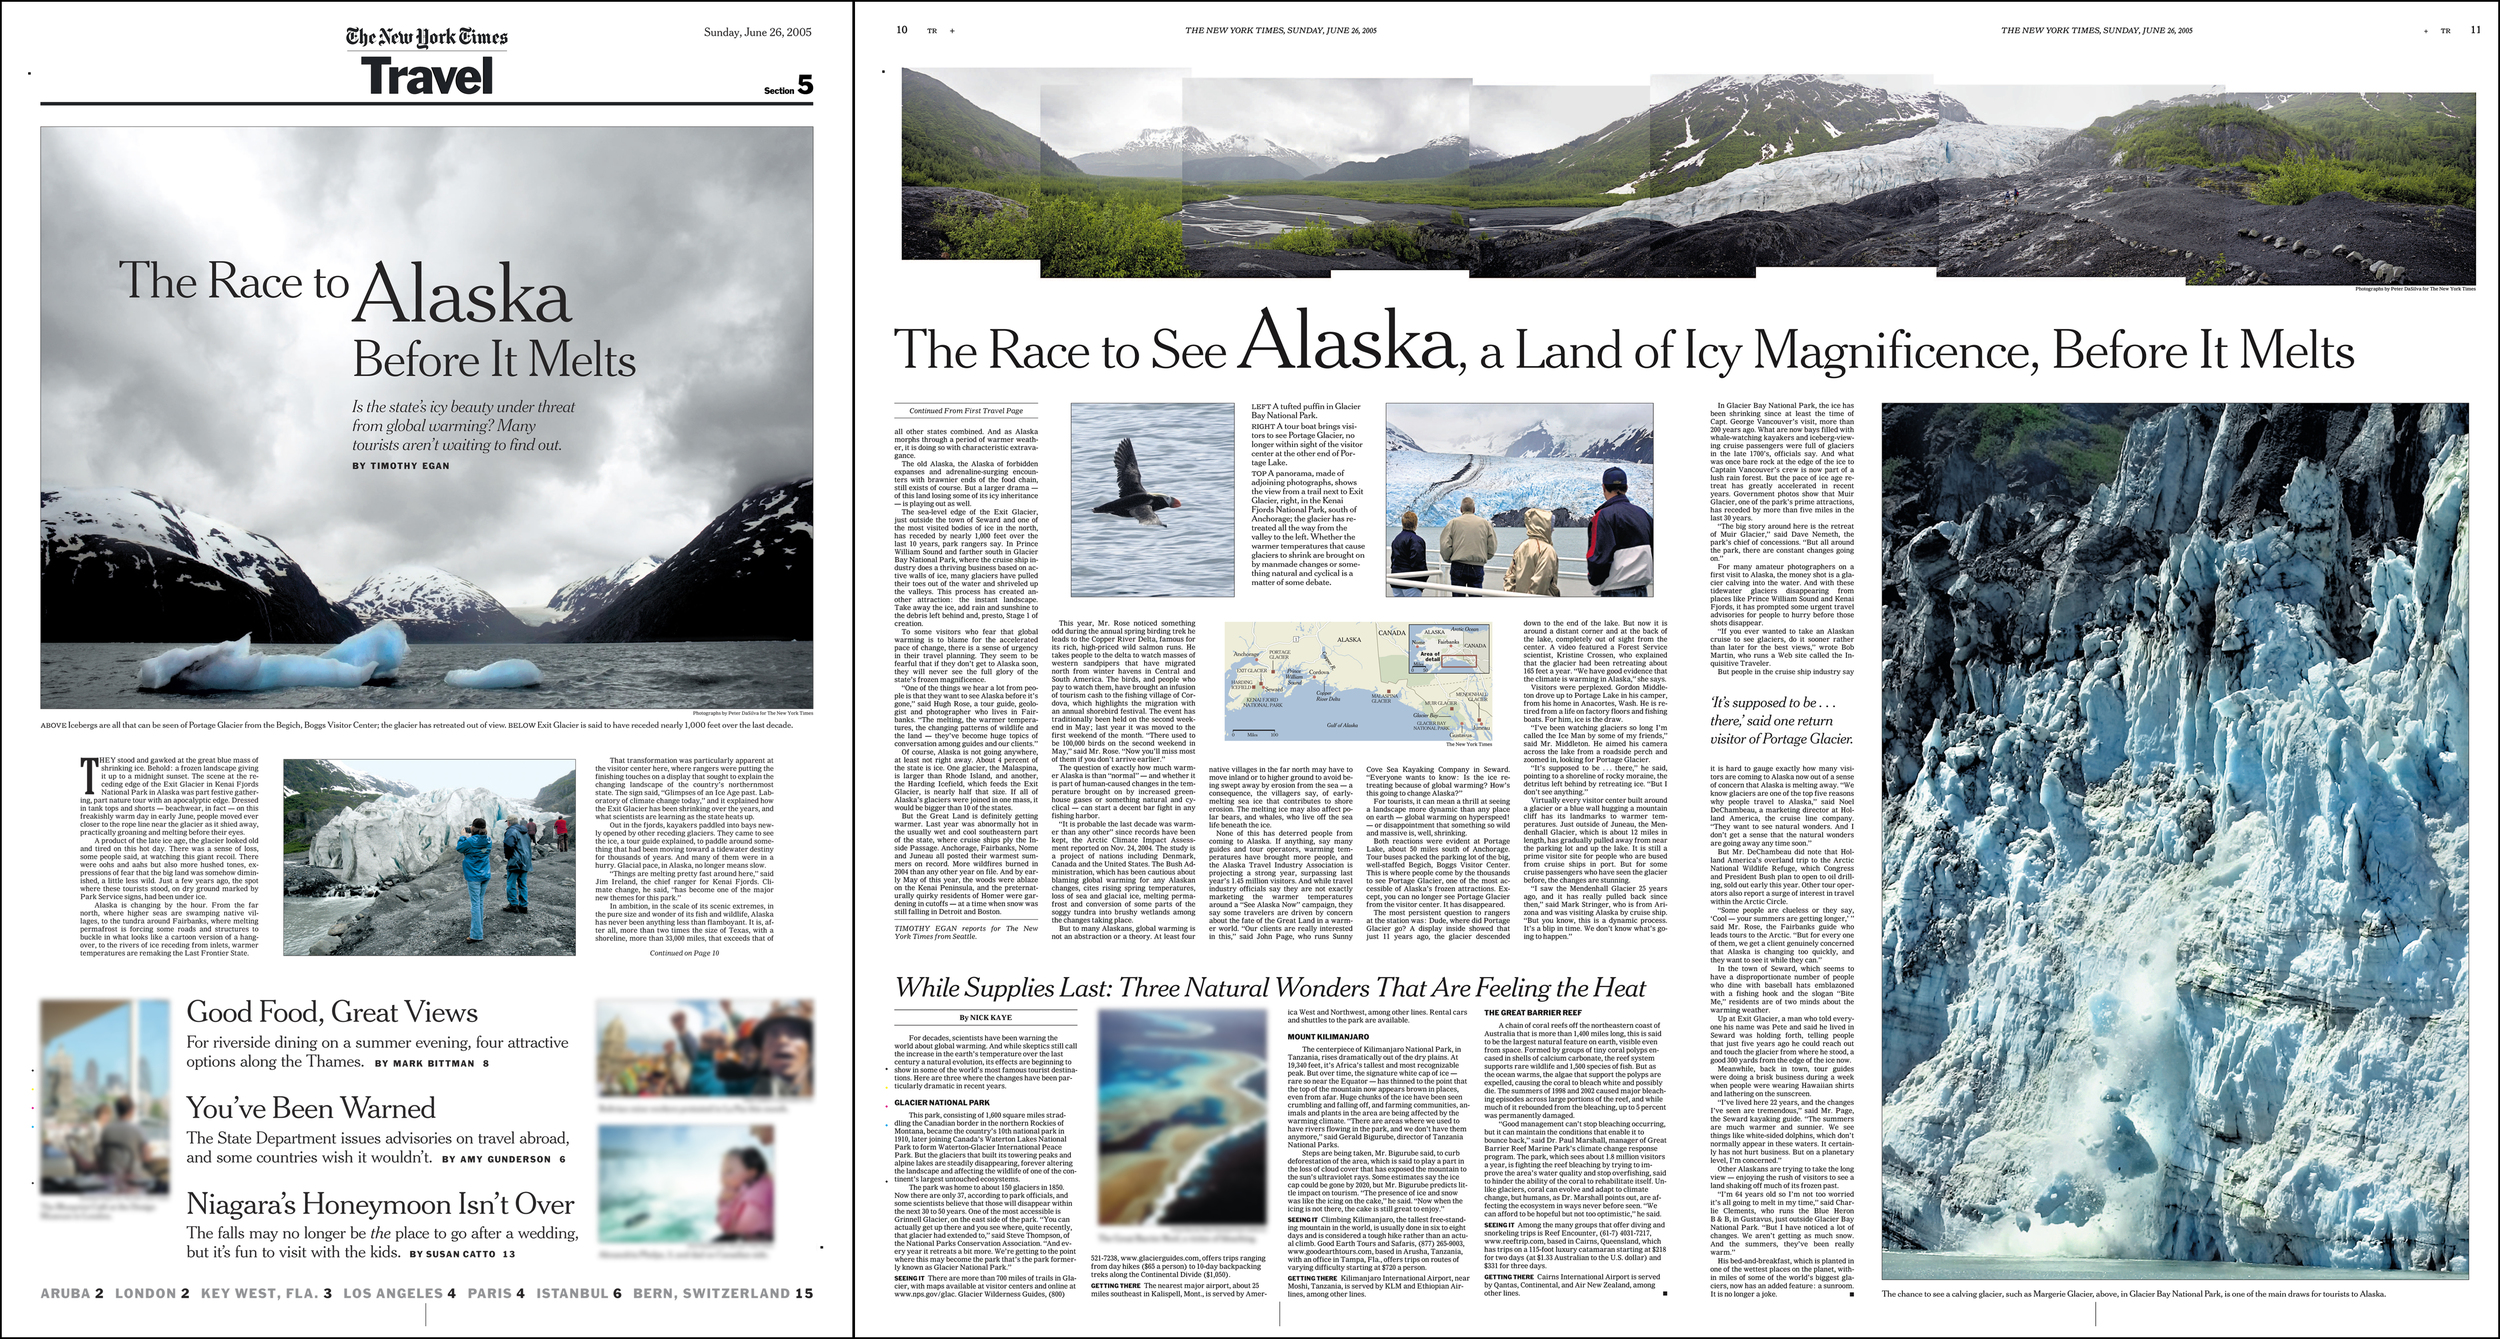   New York Times - Travel&nbsp;&nbsp; -cover/double truck spread  